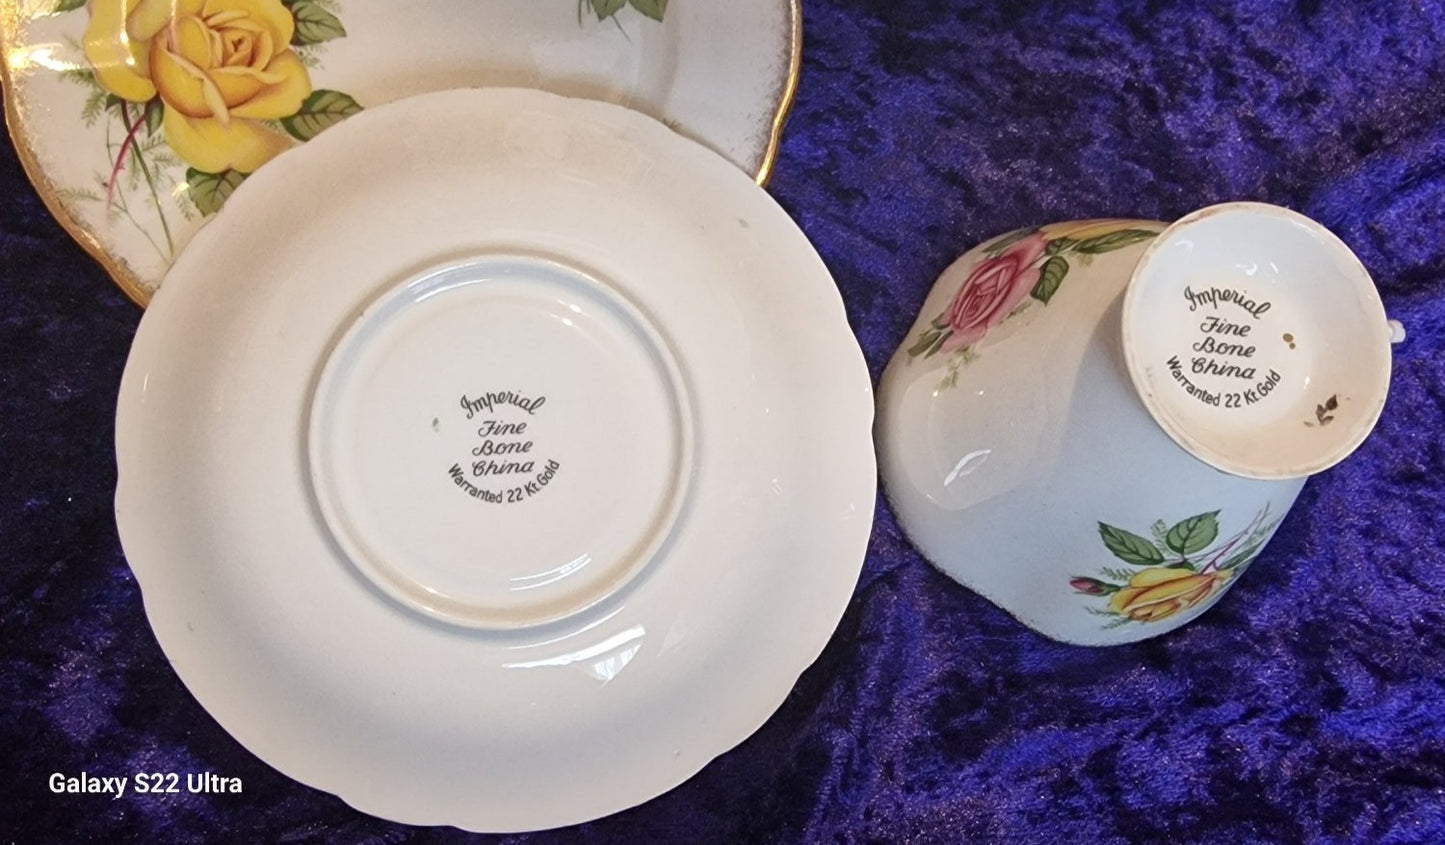 Imperial China "Country Roses" Tea Set